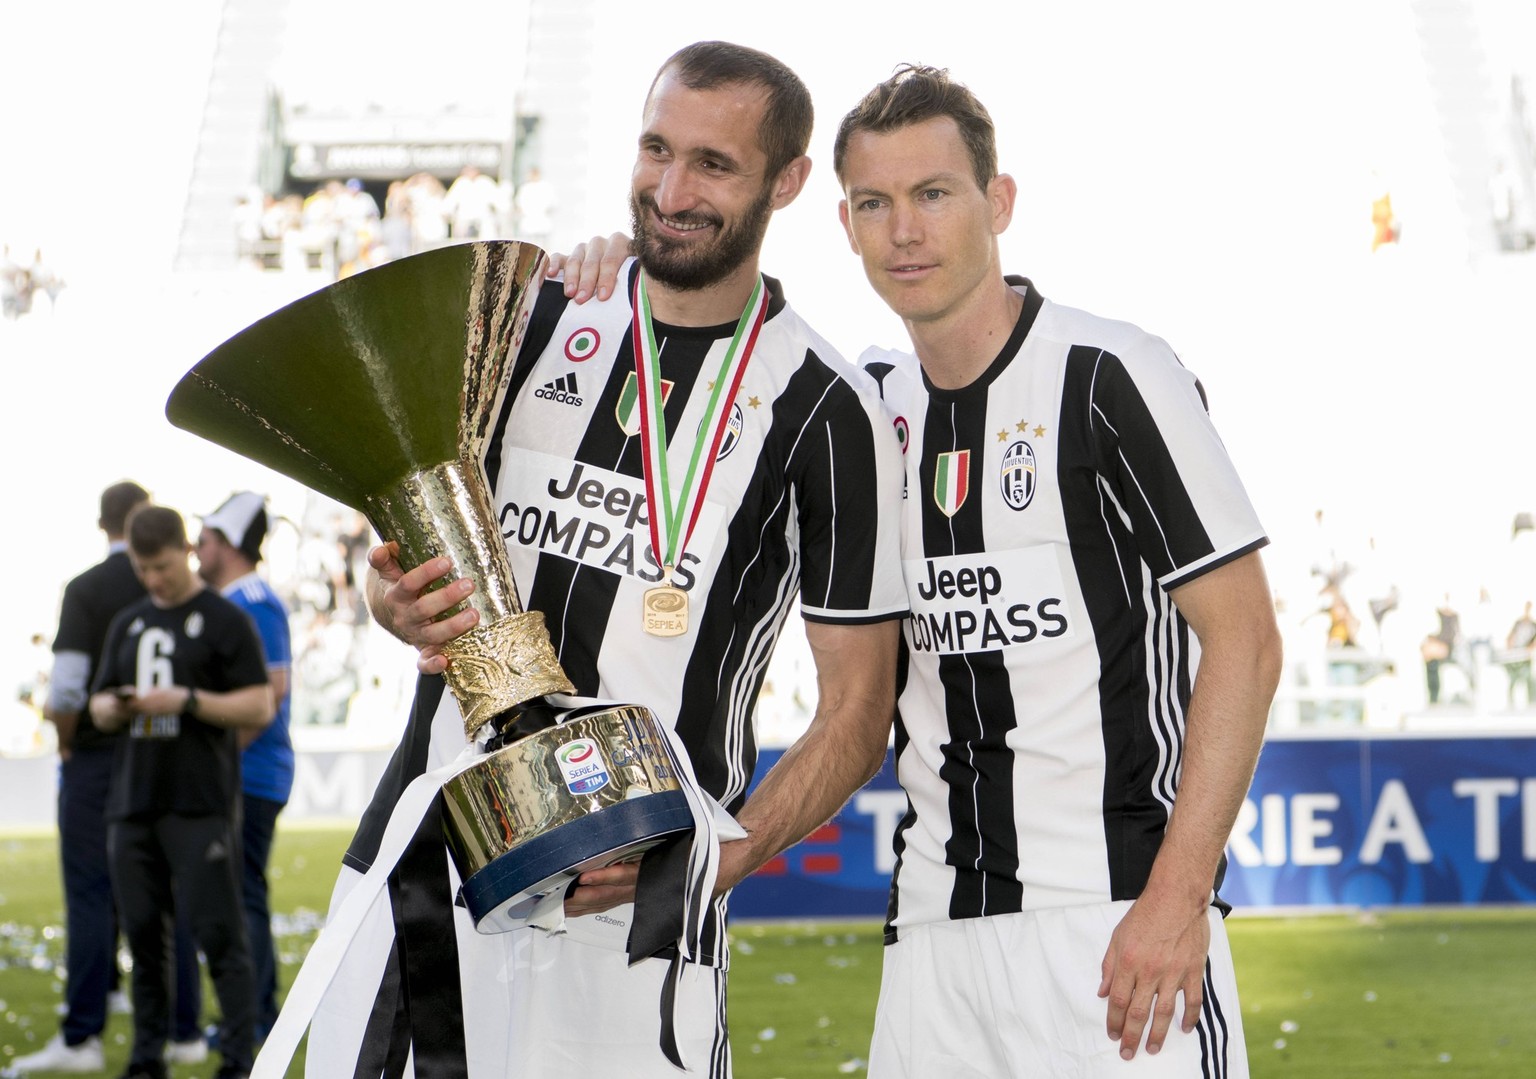 (L-R) Giorgio Chiellini, Stephan Lichtsteiner (Juventus), MAY 21, 2017 - Football / Soccer : Giorgio Chiellini and Stephan Lichtsteiner of Juventus celebrate their sixth straight league title with the ...